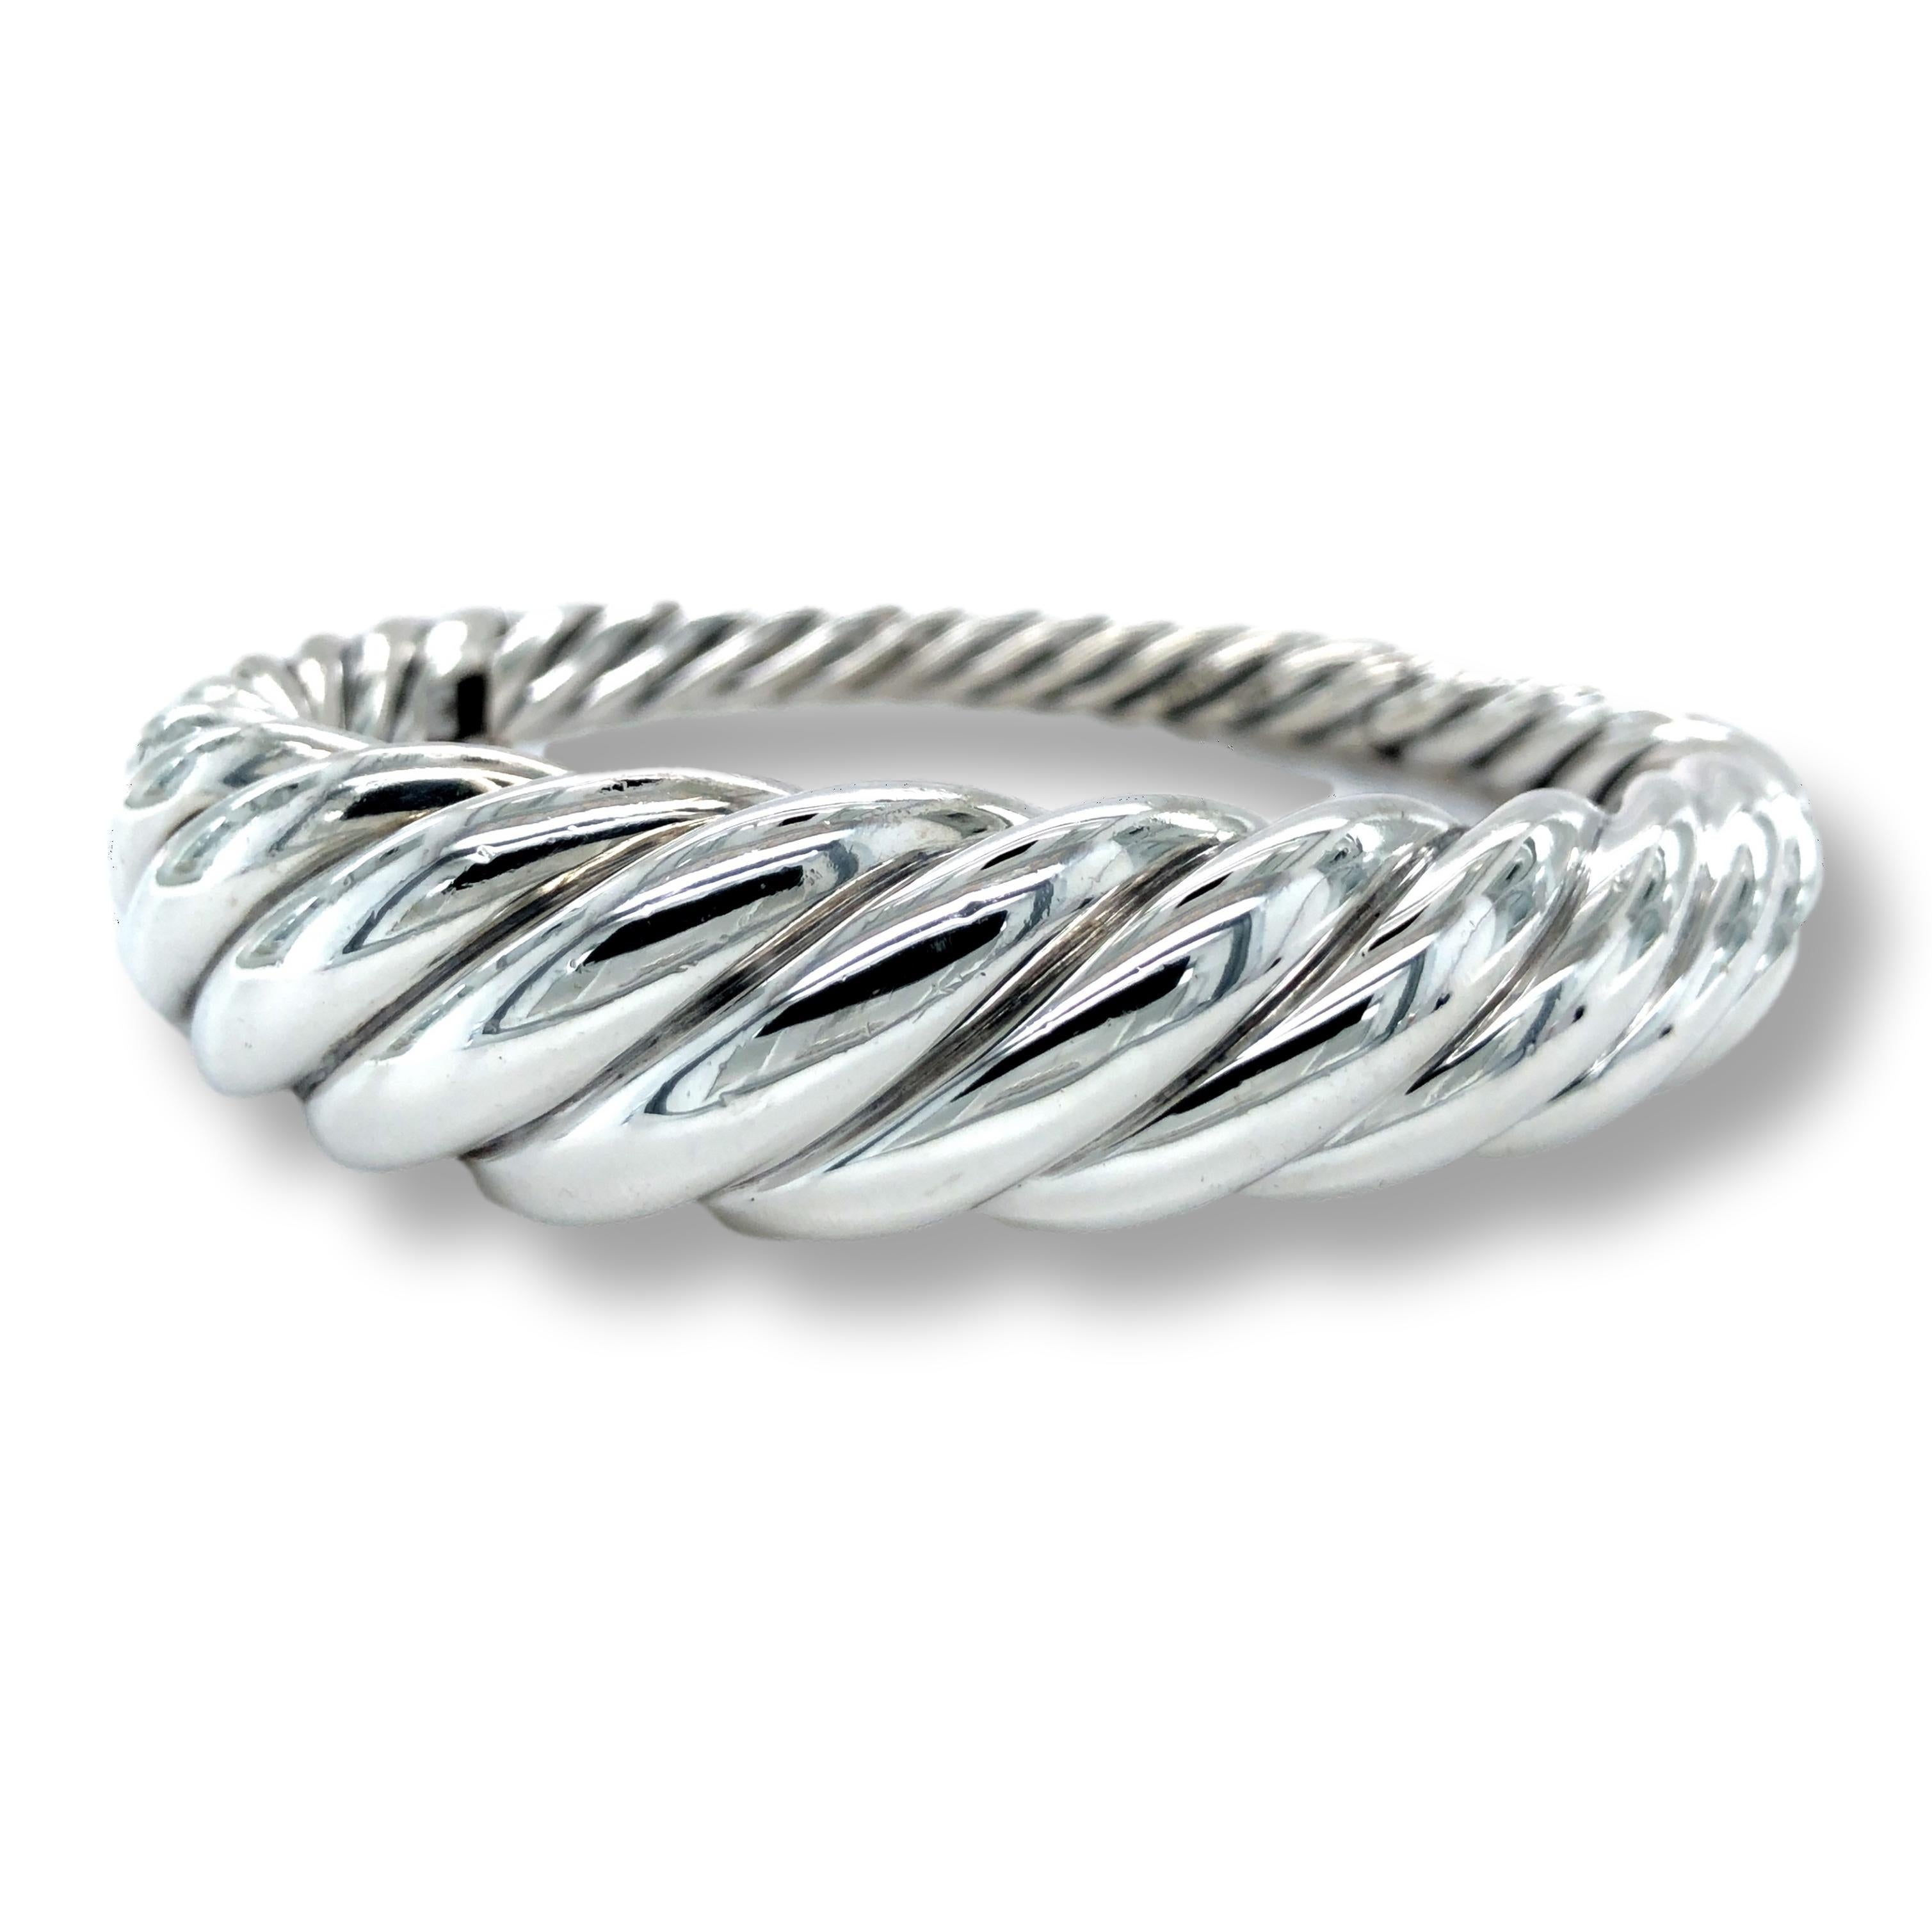 David Yurman pure form bangle bracelet finely crafted in sterling silver in a twist design measuring 17mm at the front and 6 mm towards the back. The bracelet has a snap hinge closure. 

BRACELET SPECIFICATIONS
Brand: David Yurman 
Hallmarks: © D.Y.